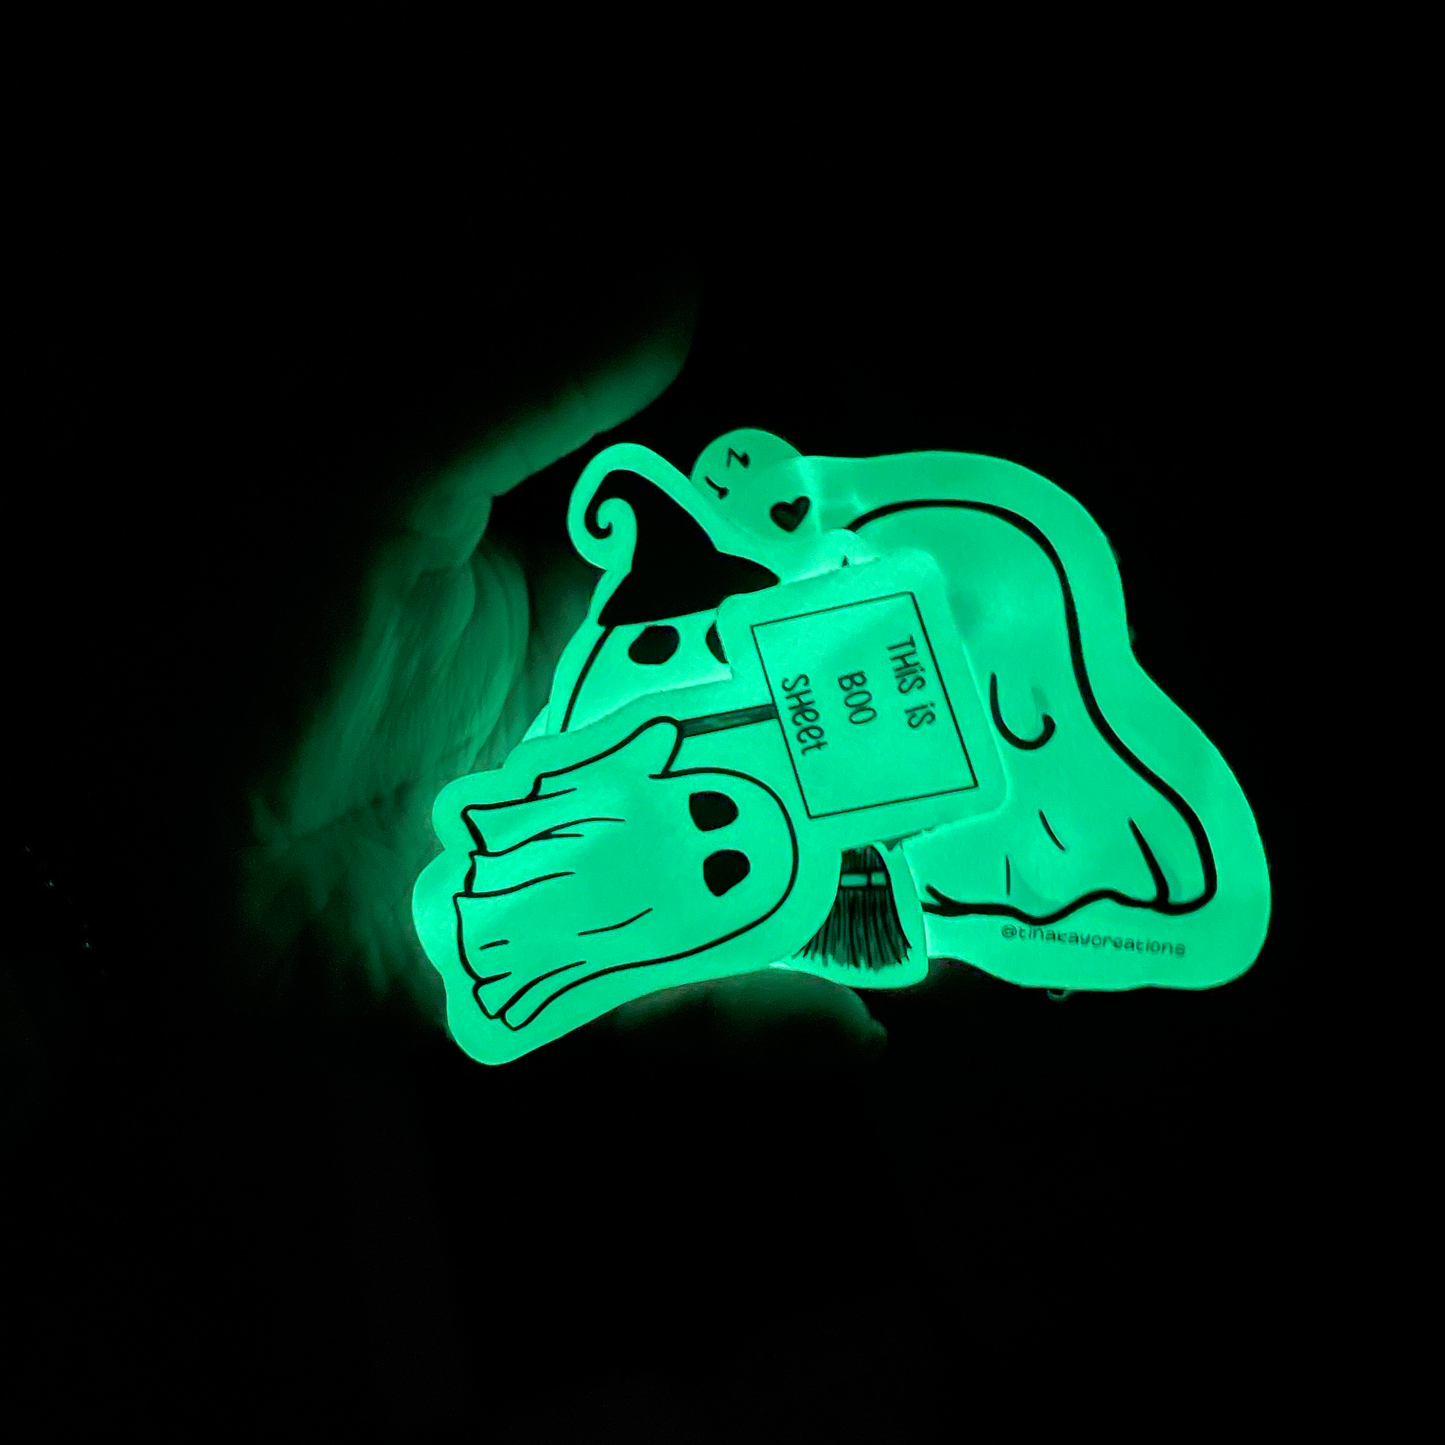 Ghostly Glows: Water-Resistant Spooky Sticker Set with Glow-in-the-Dark Haunting Effect!